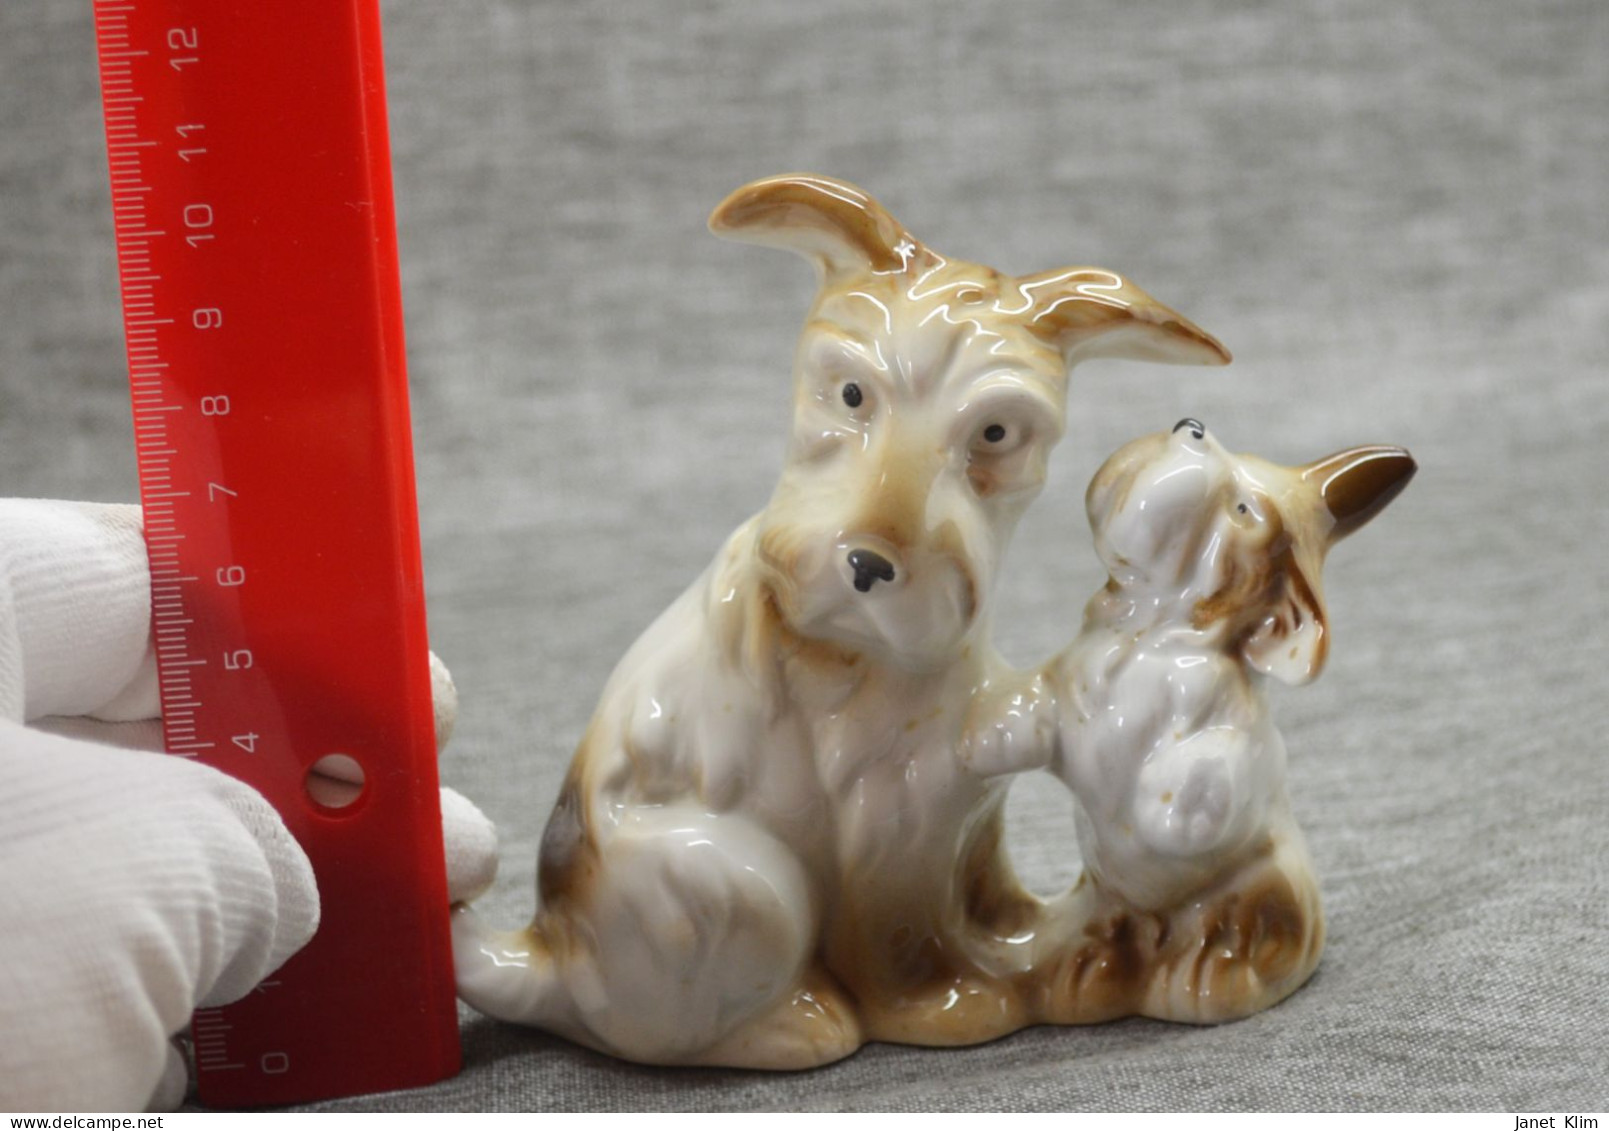 Vintage porcelain figurine of a dog with a puppy